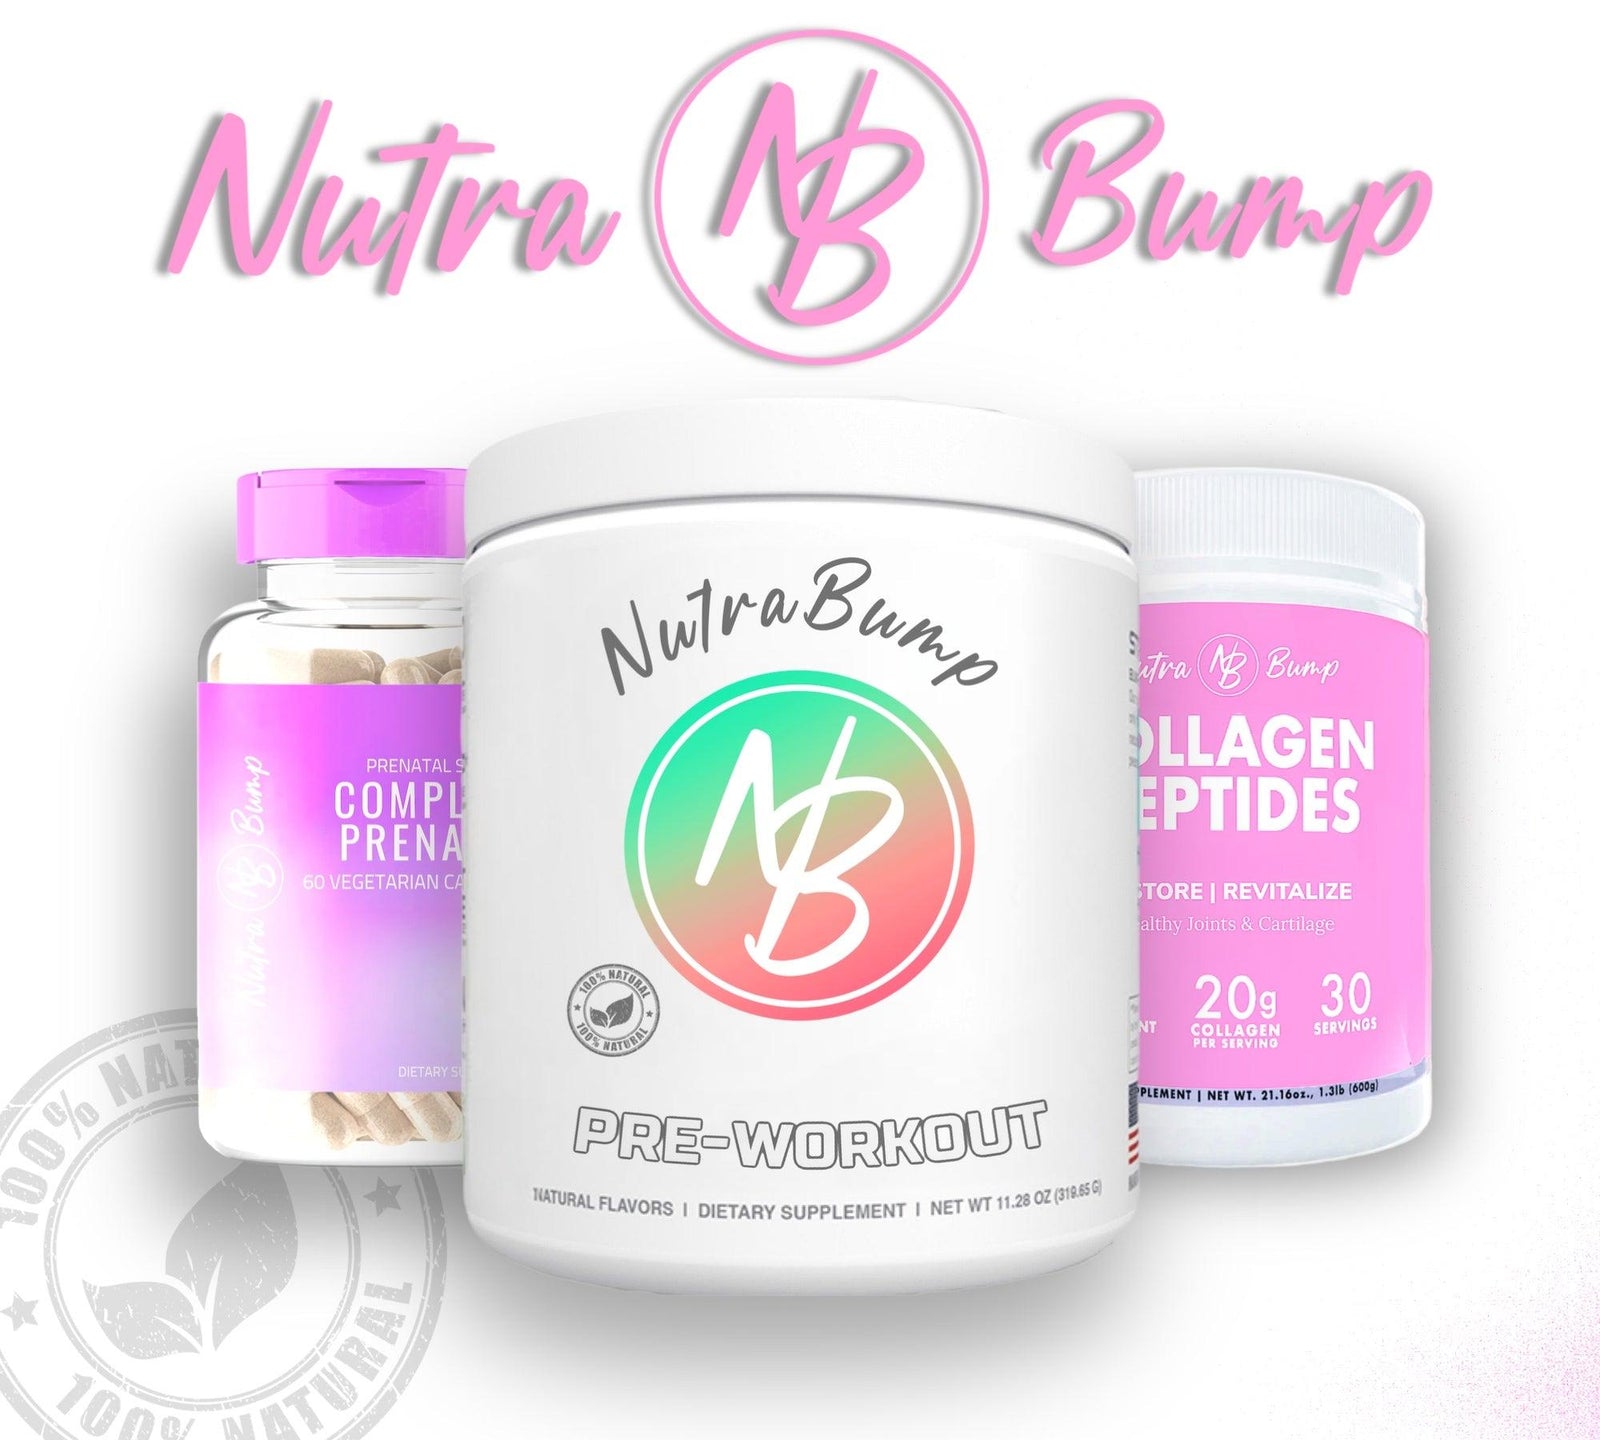 NutraBump for the Bumped Up Mothers - NutraBump Nutrition bumped up, collagen, nutabump, postnatal protein, pregnancy pre workout, pregnancy supplements, prenatal vitamins